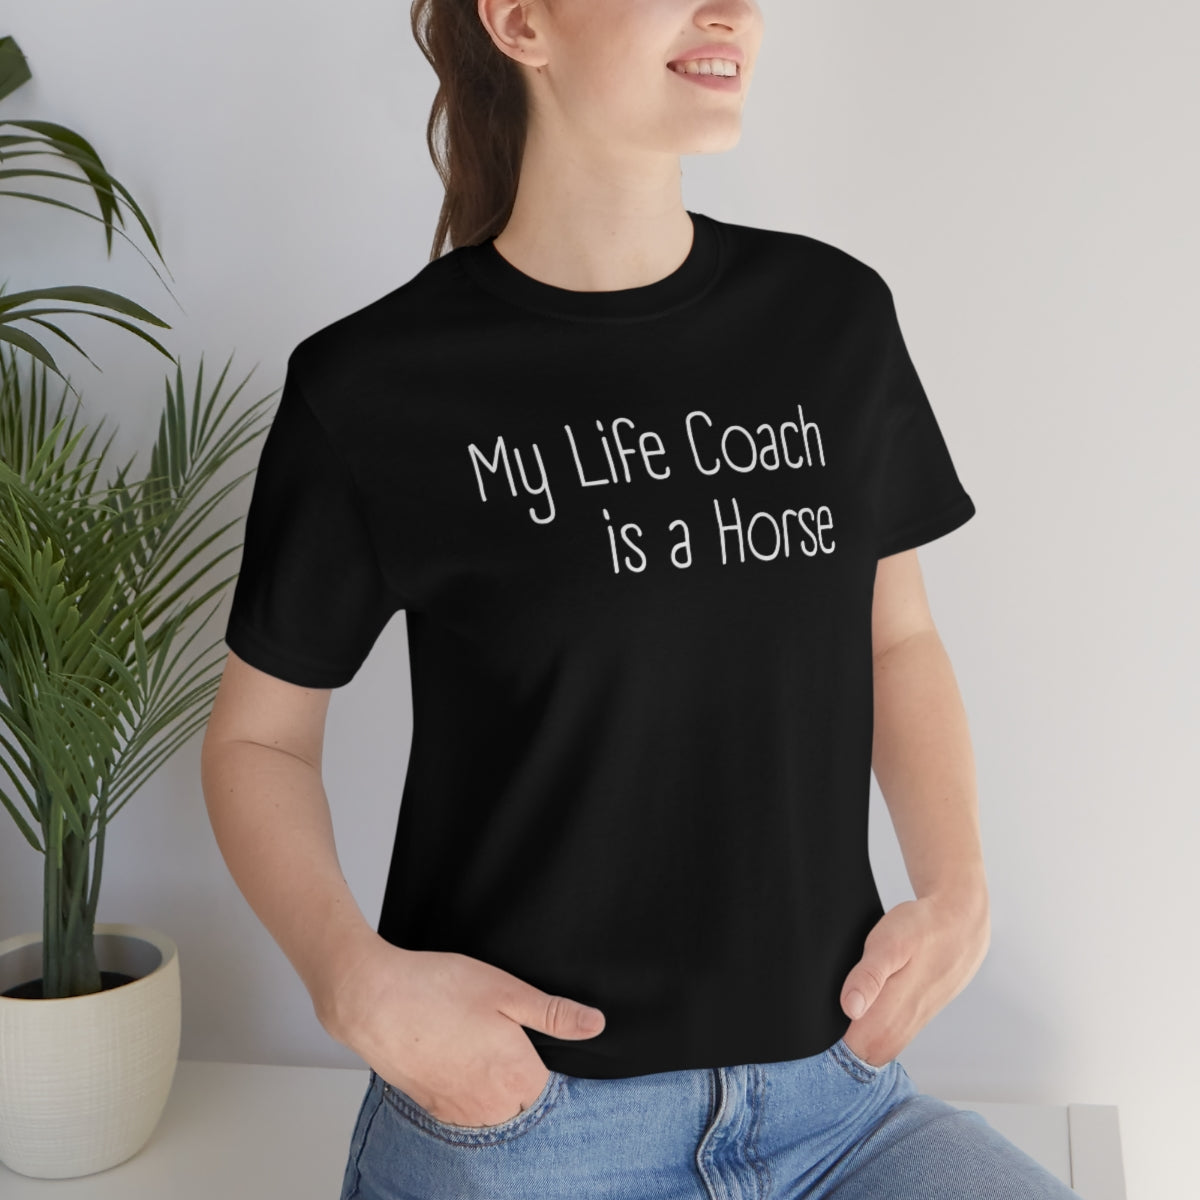 My Life Coach is a Horse